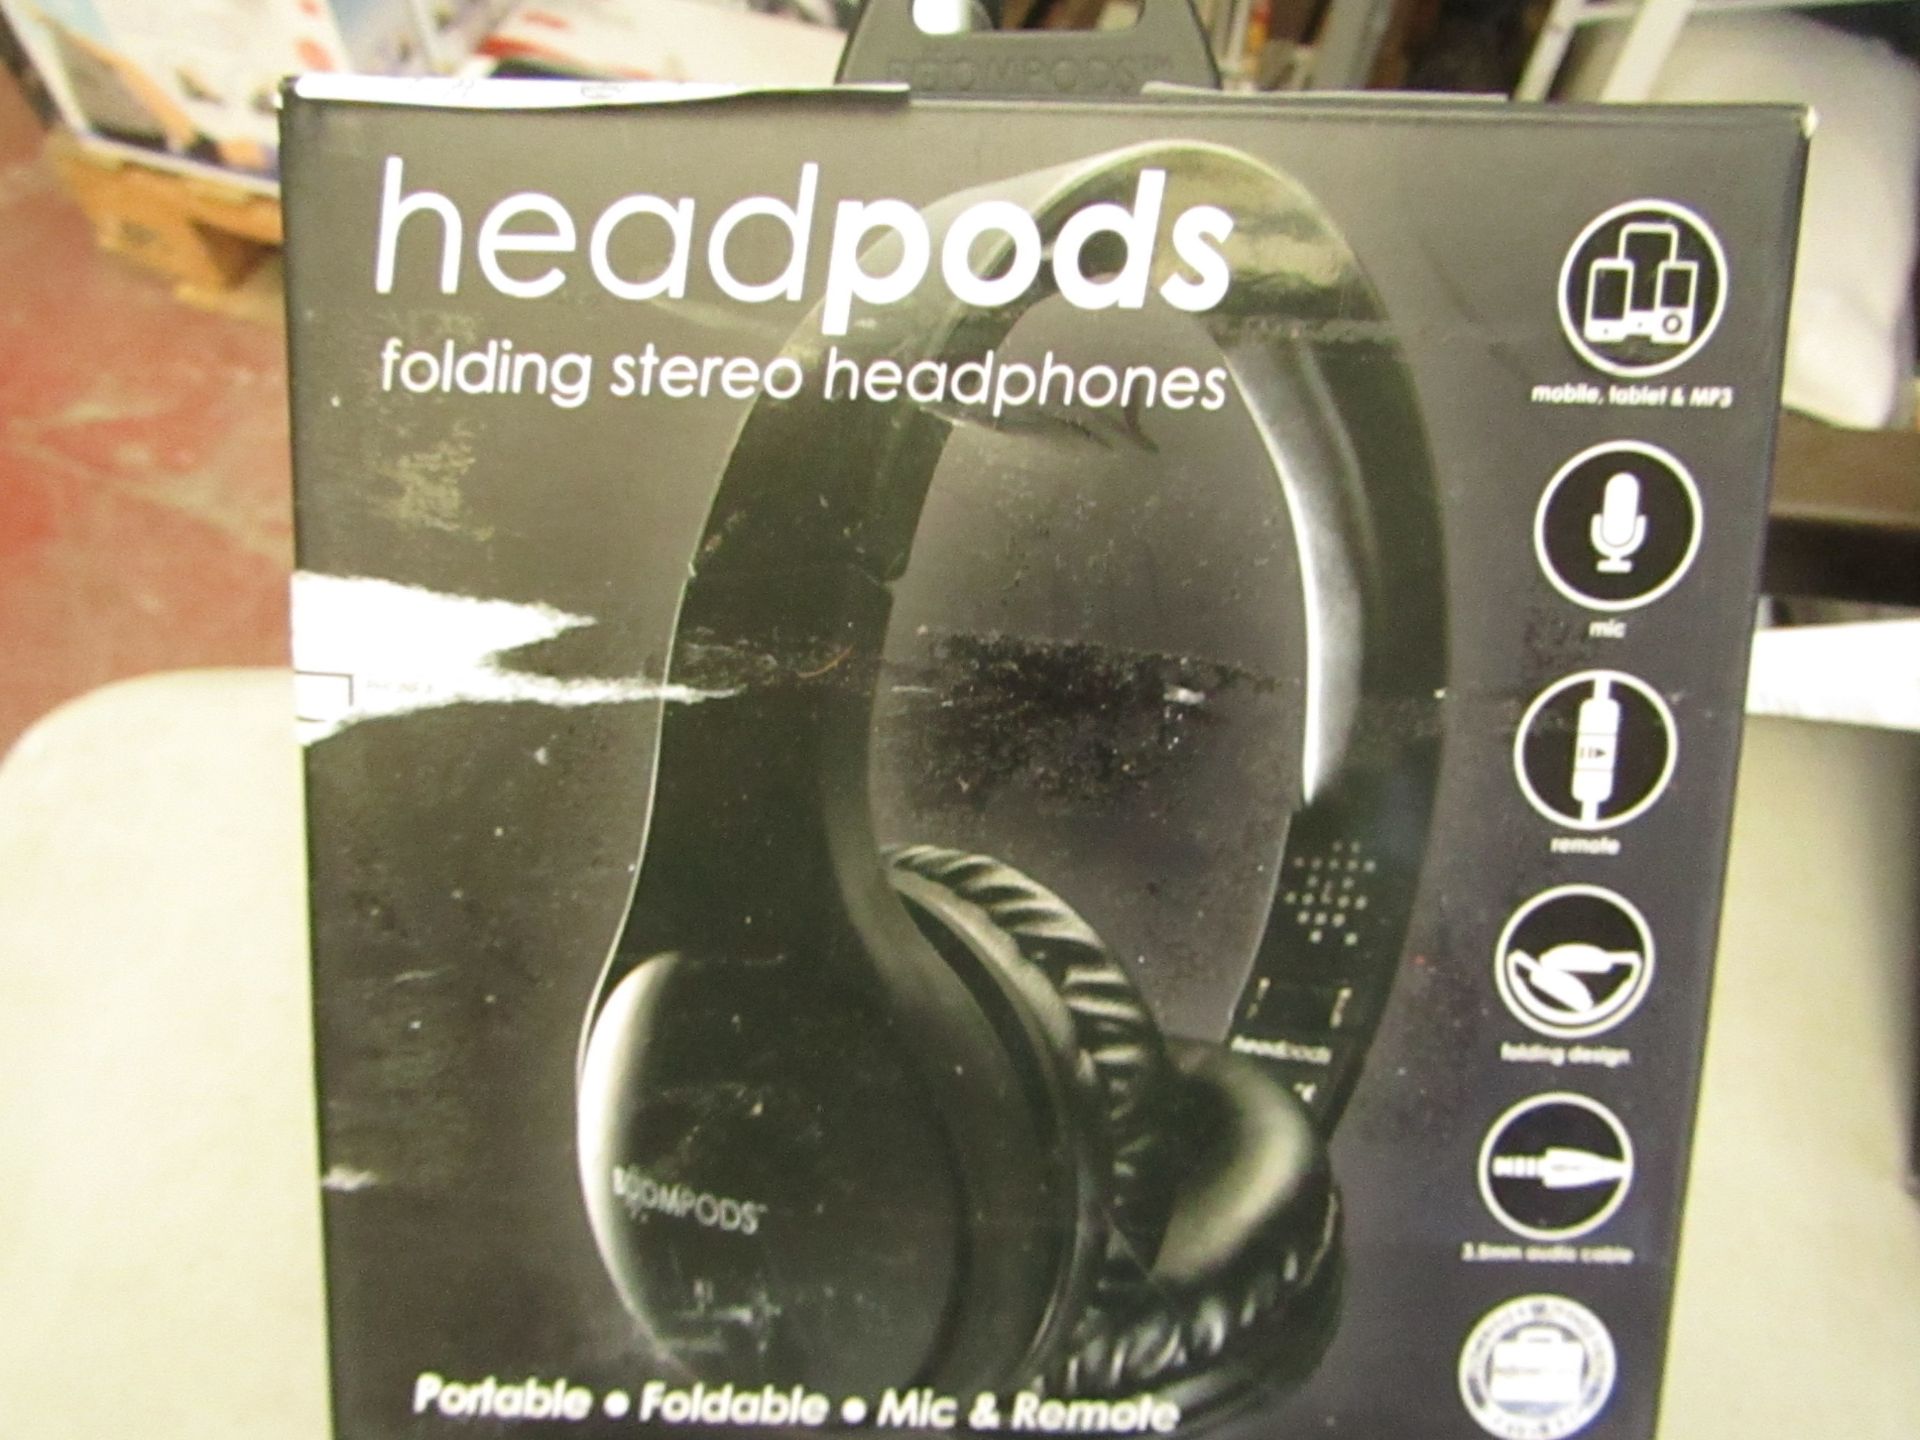 Headpods folding stereo headphones, tested working